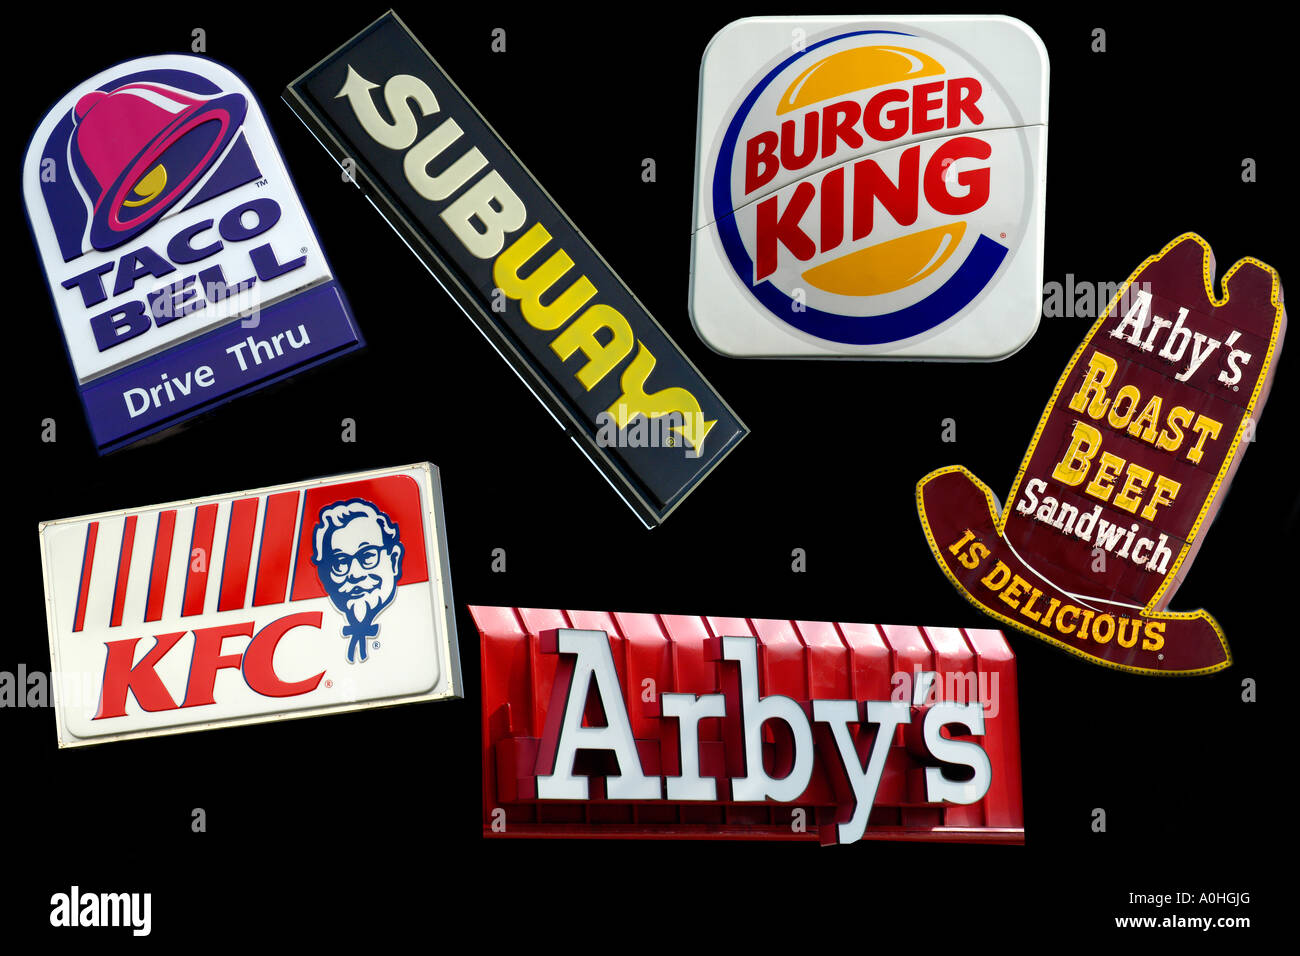 A collage of Fast Food Restaurant signs Stock Photo